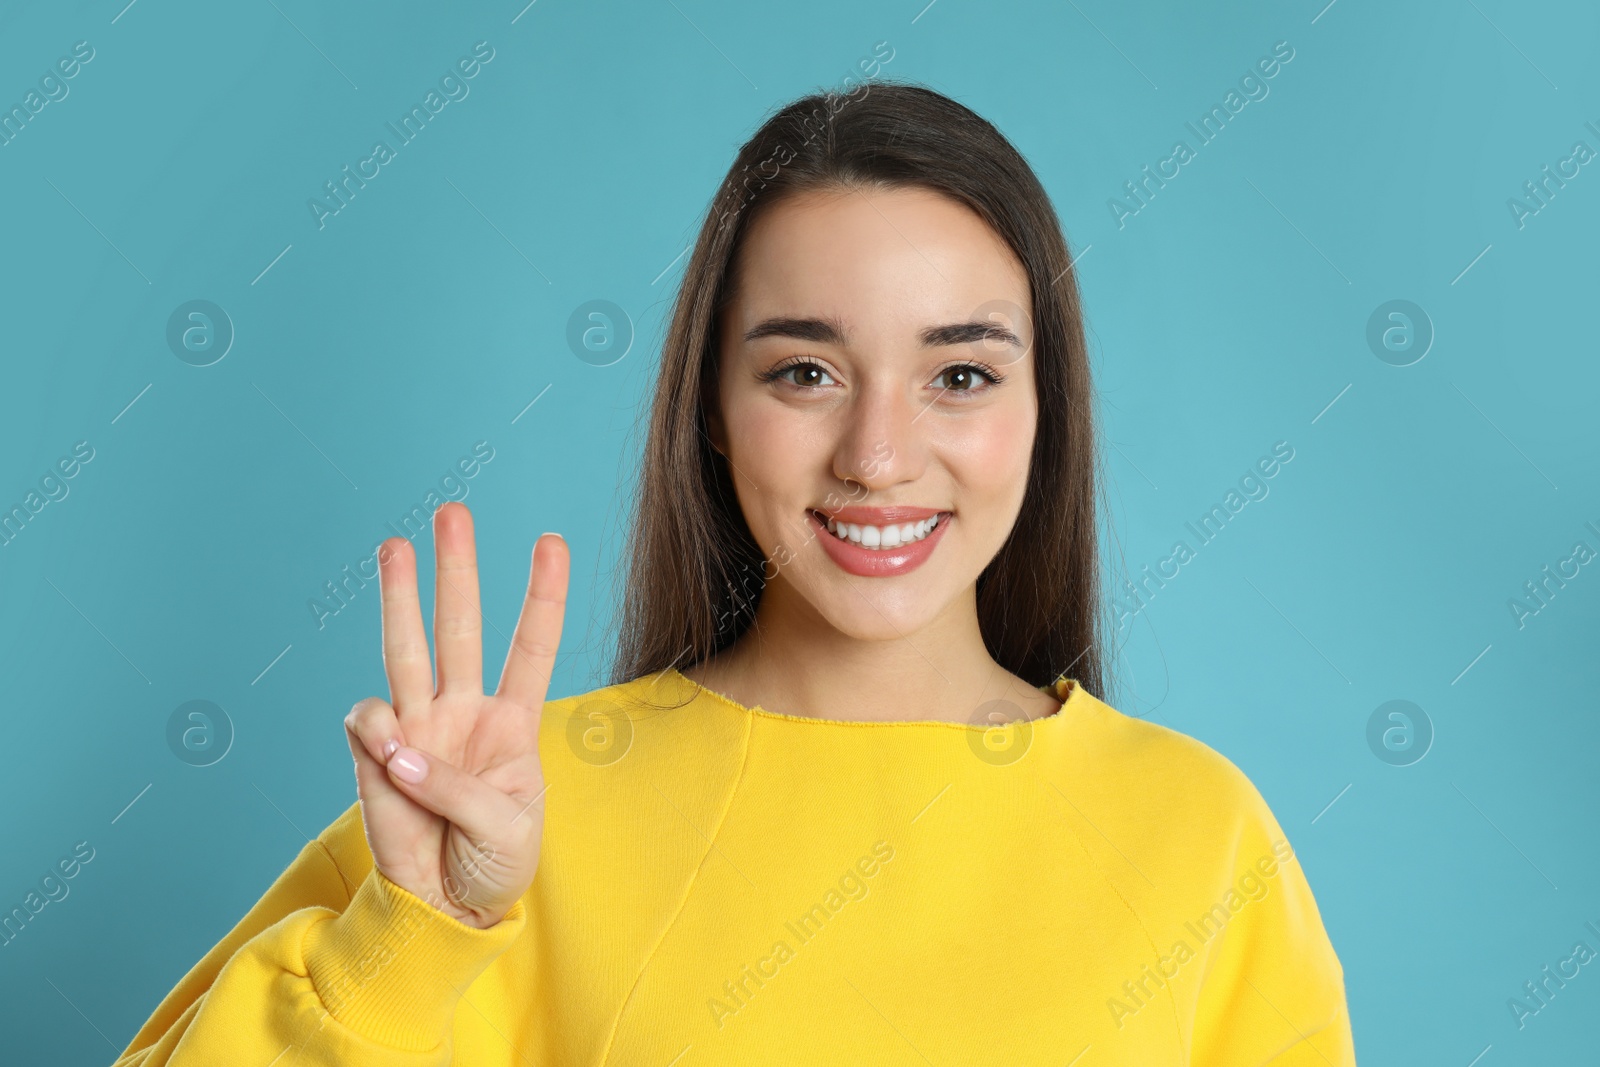 Photo of Woman showing number three with her hand on light blue background